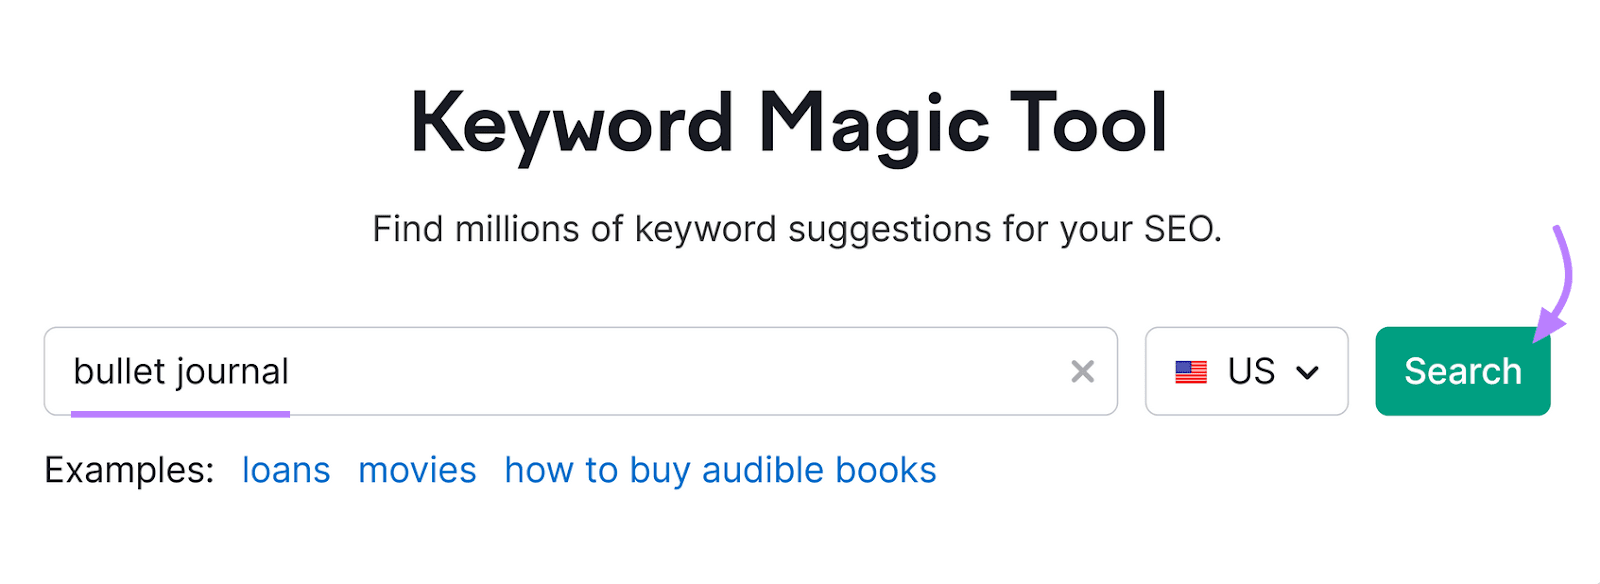 Keyword Magic Tool with “bullet journal” entered.